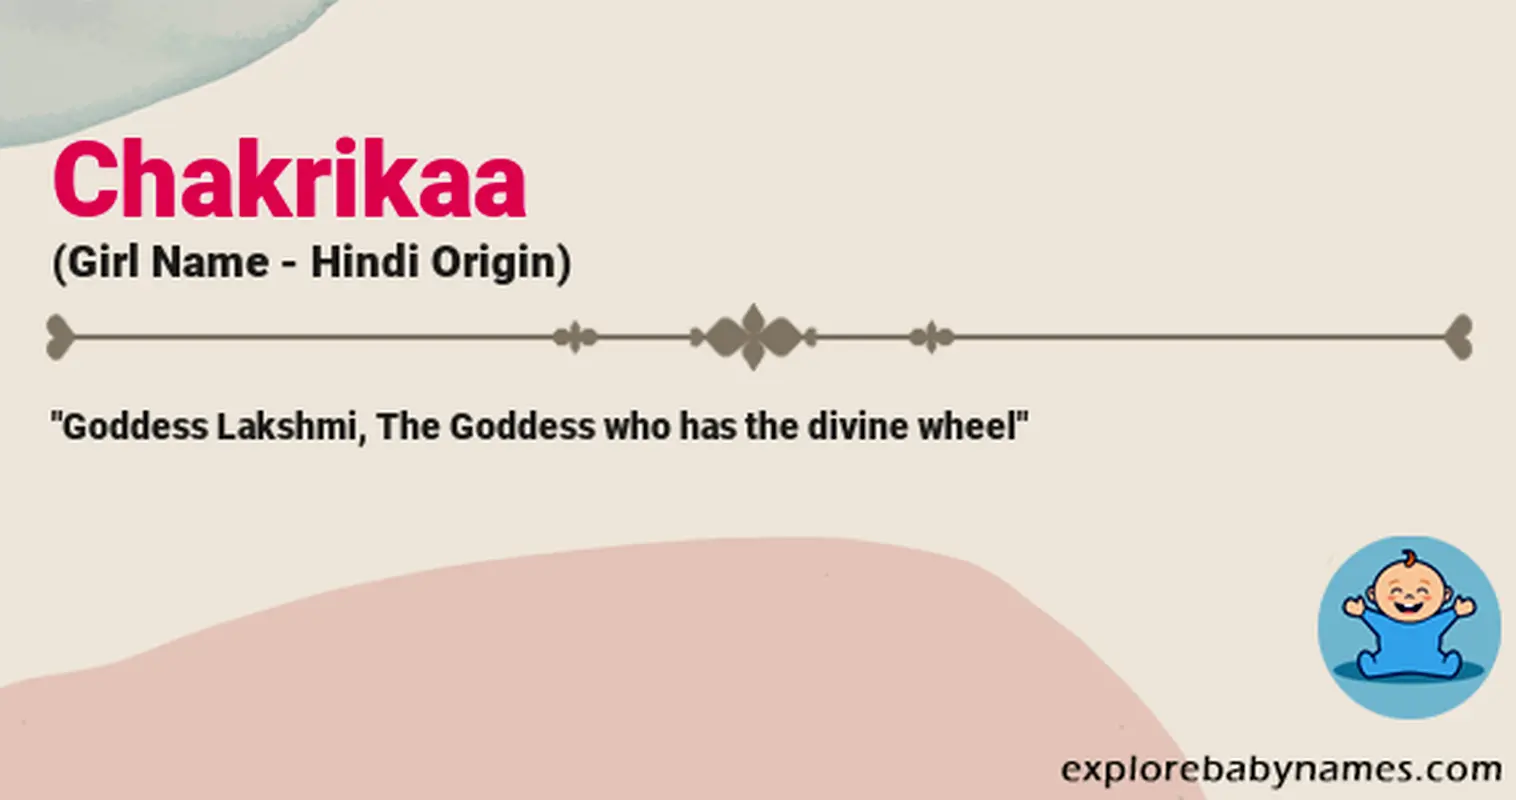 Meaning of Chakrikaa